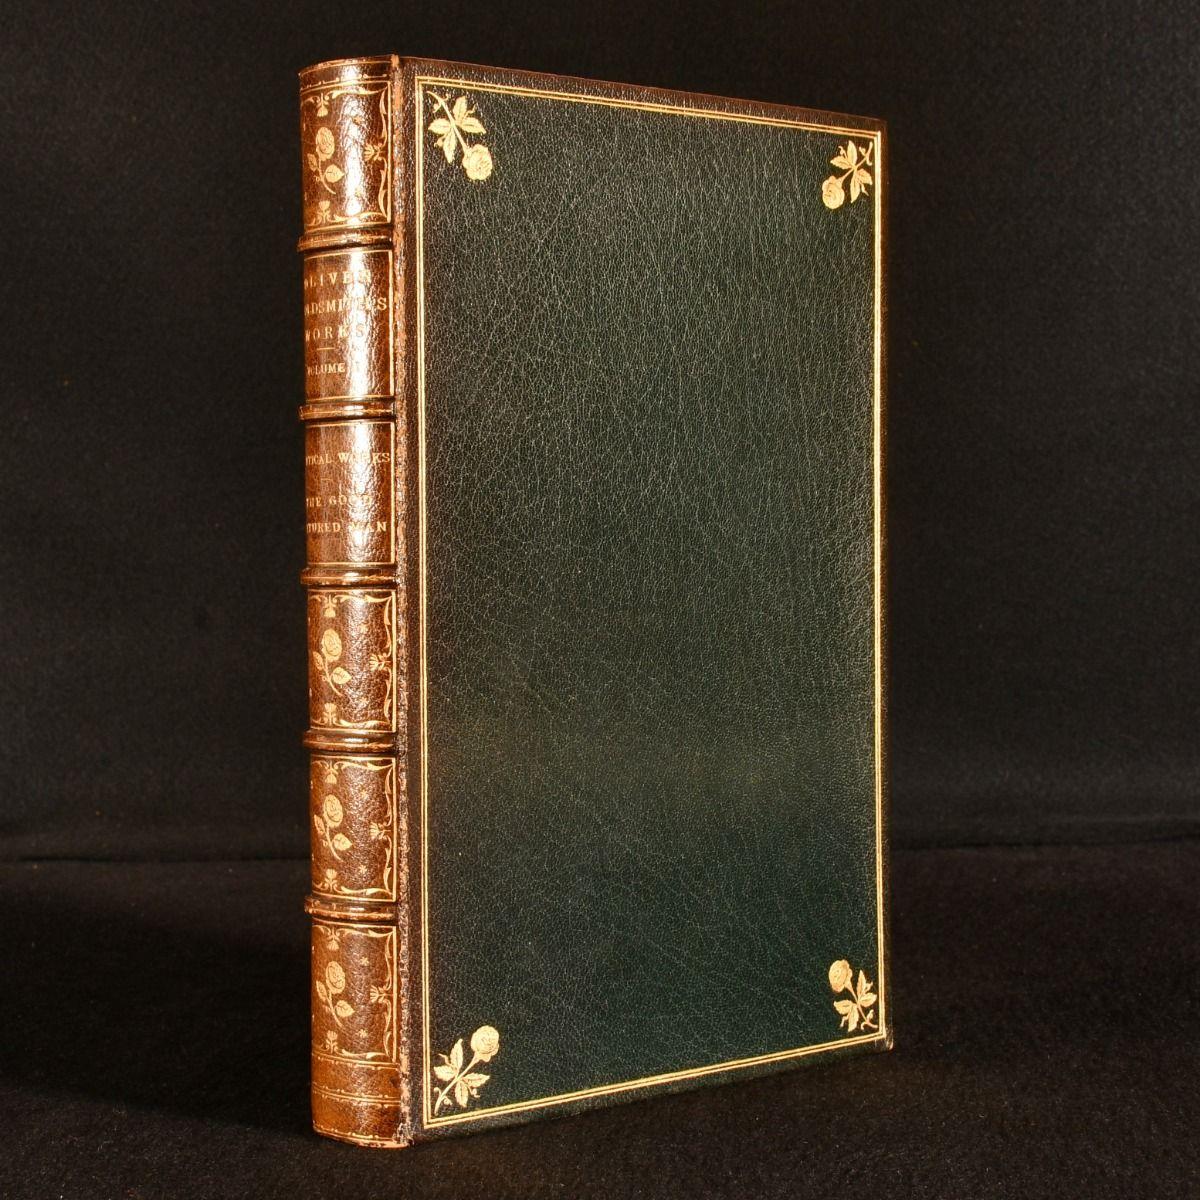 A truly beautiful limited edition set of the works of Anglo-Irish novelist Oliver Goldsmith, illustrated throughout and with a number of volumes signed by the artists.

The twelve volume Wakefield Edition of Goldsmith's works, limited to five